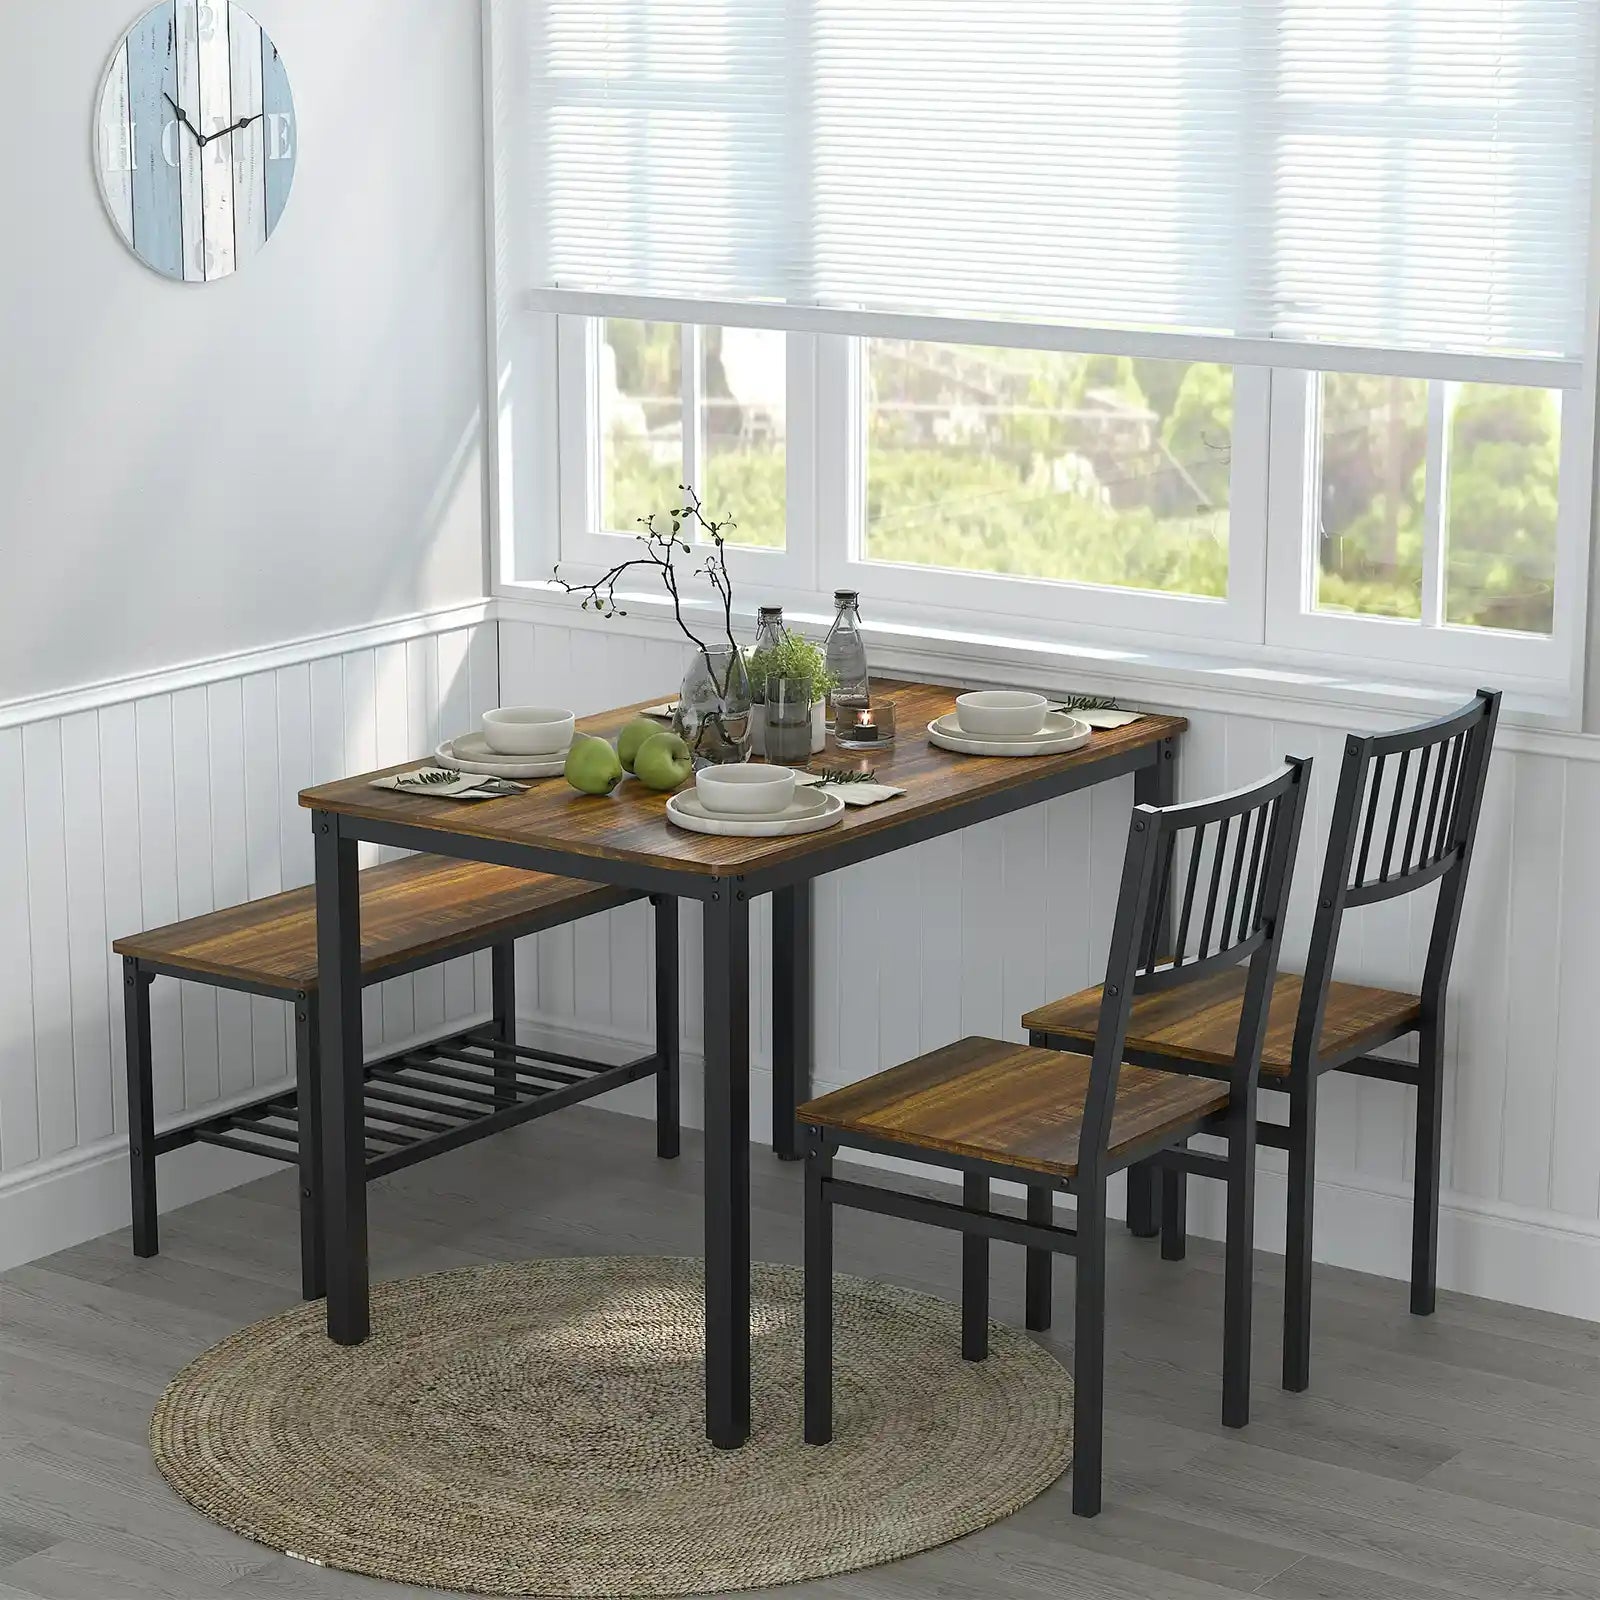 Rectangular Dining Table Set with 2 Chairs and a Bench